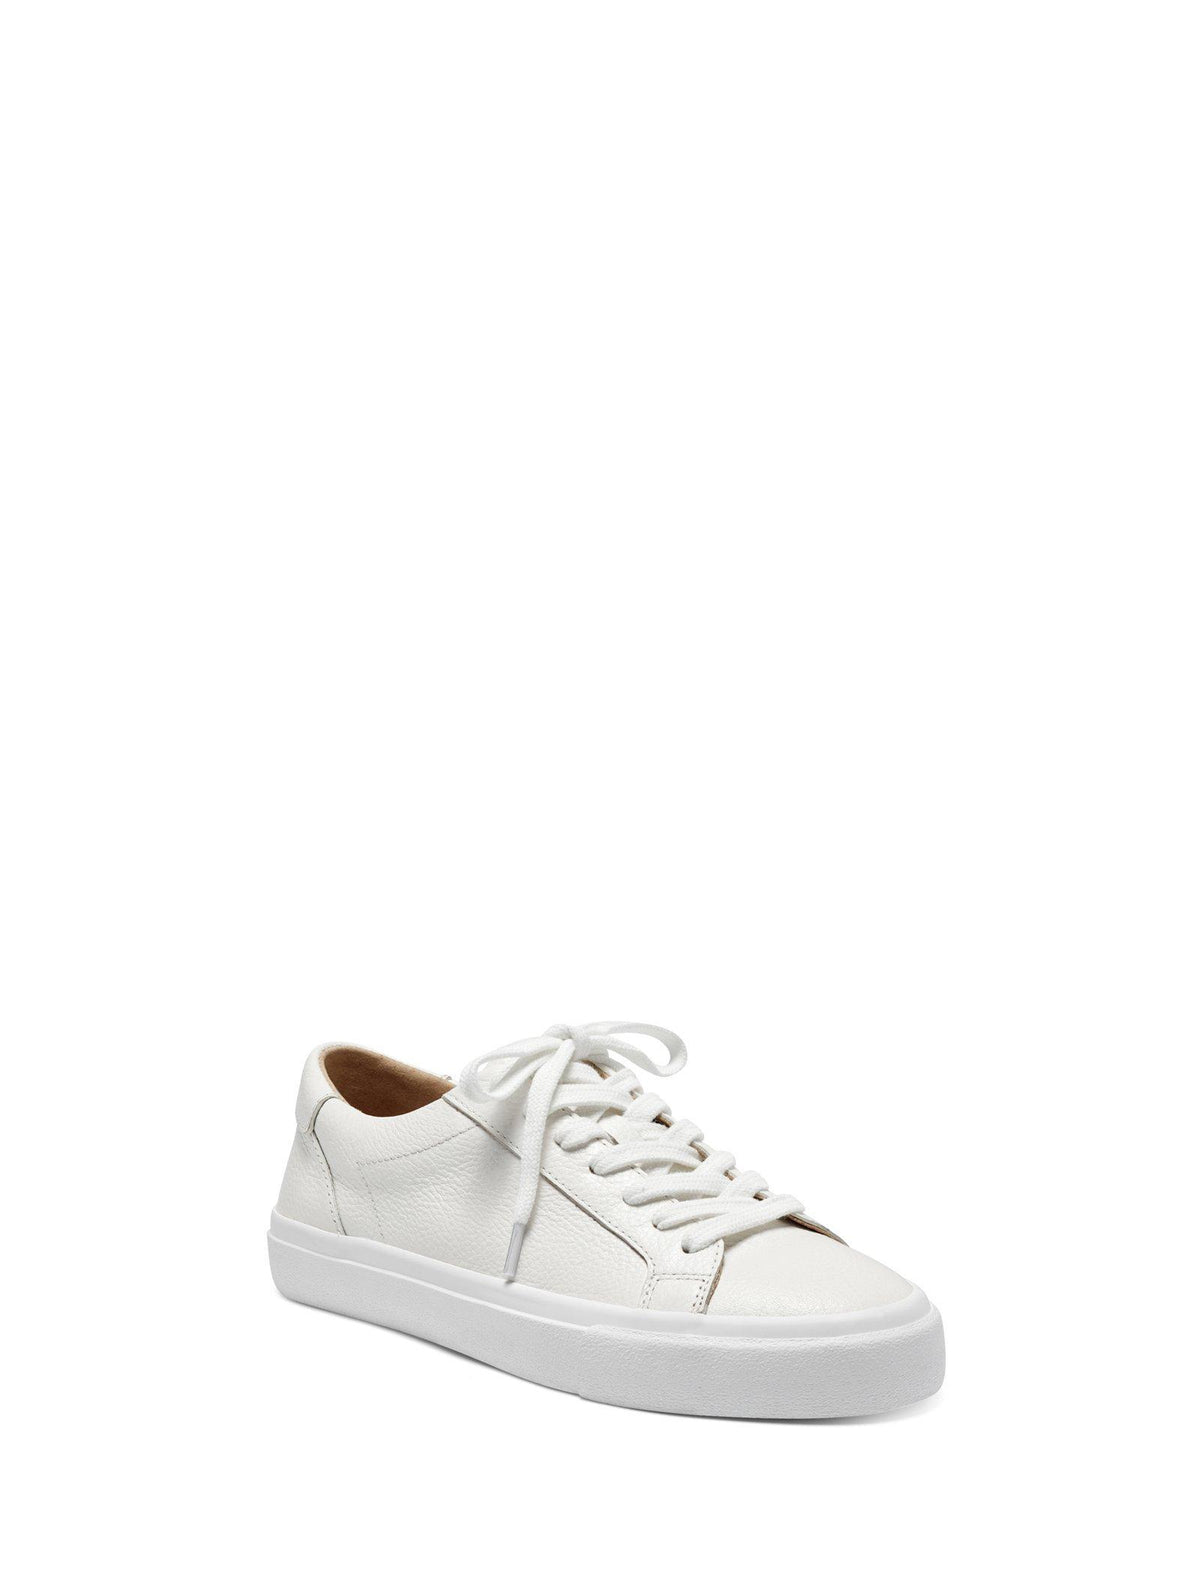 Lucky Brand Darleena Leather Sneaker Natural